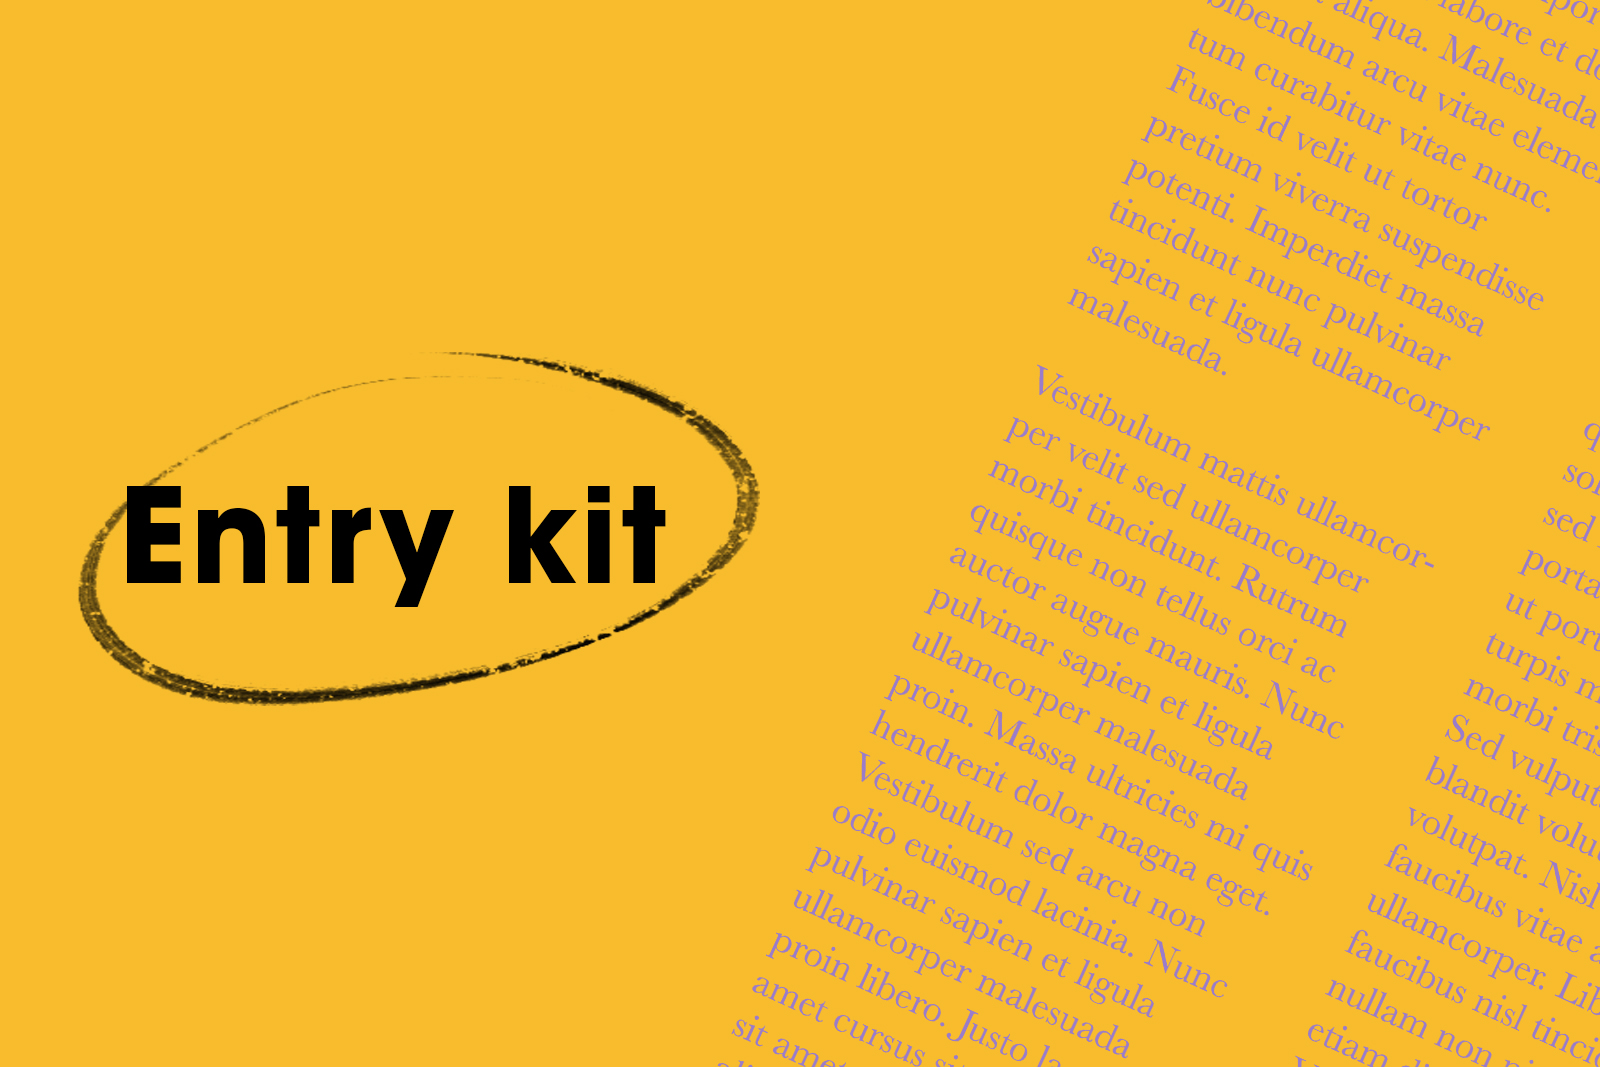 Entry Kit, the type is in black and written on a yellow background